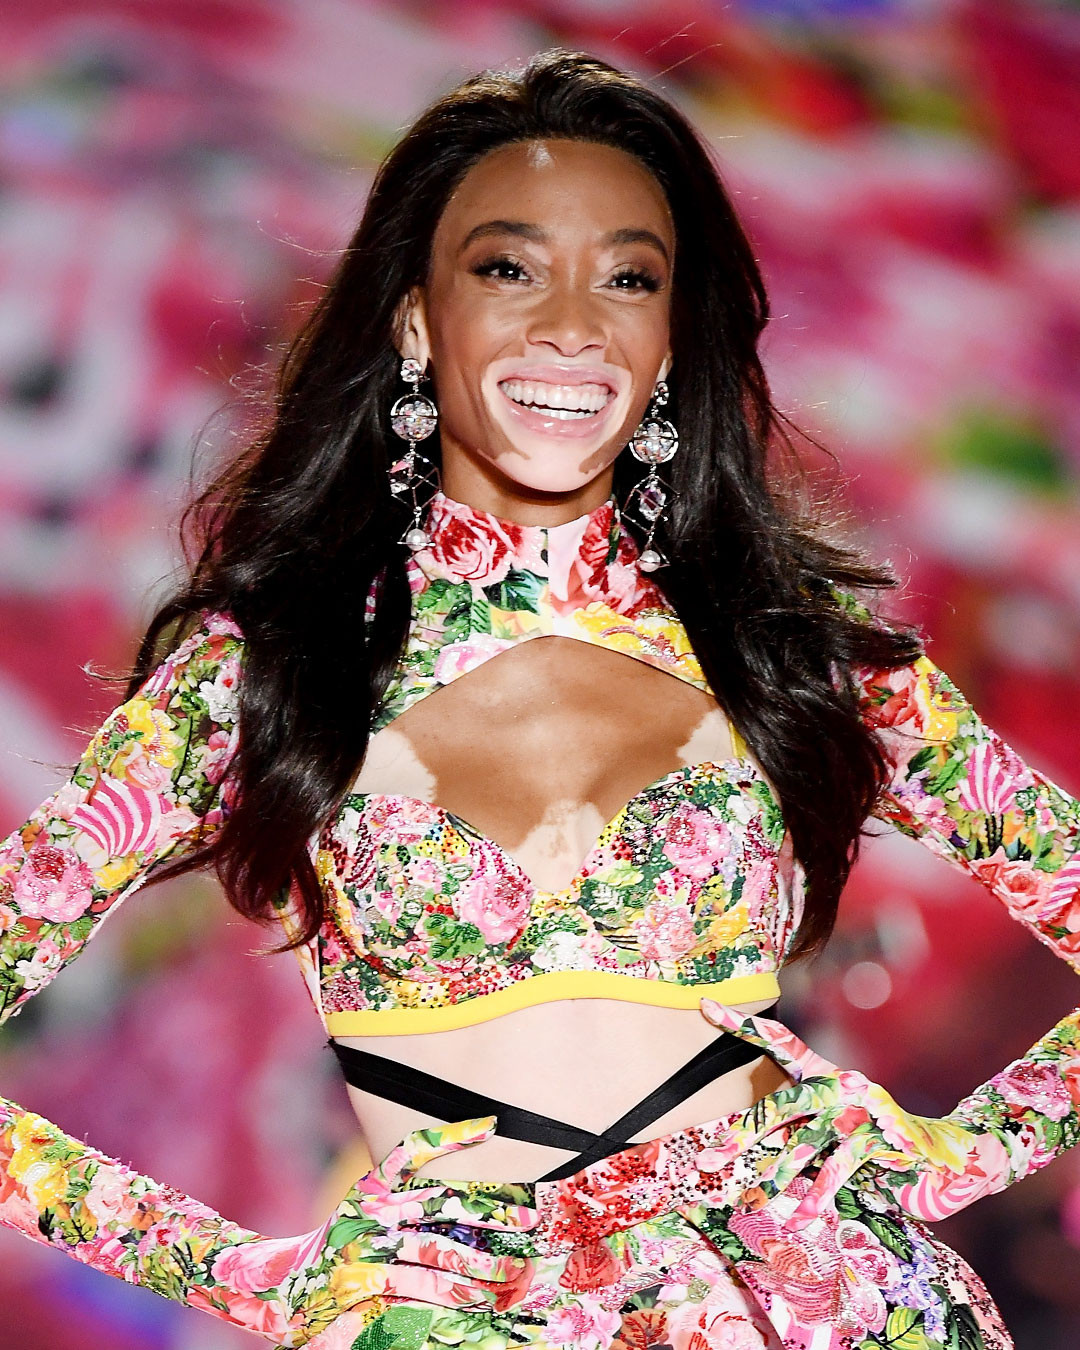 10 golden rules for an Angel body before the Victoria's Secret